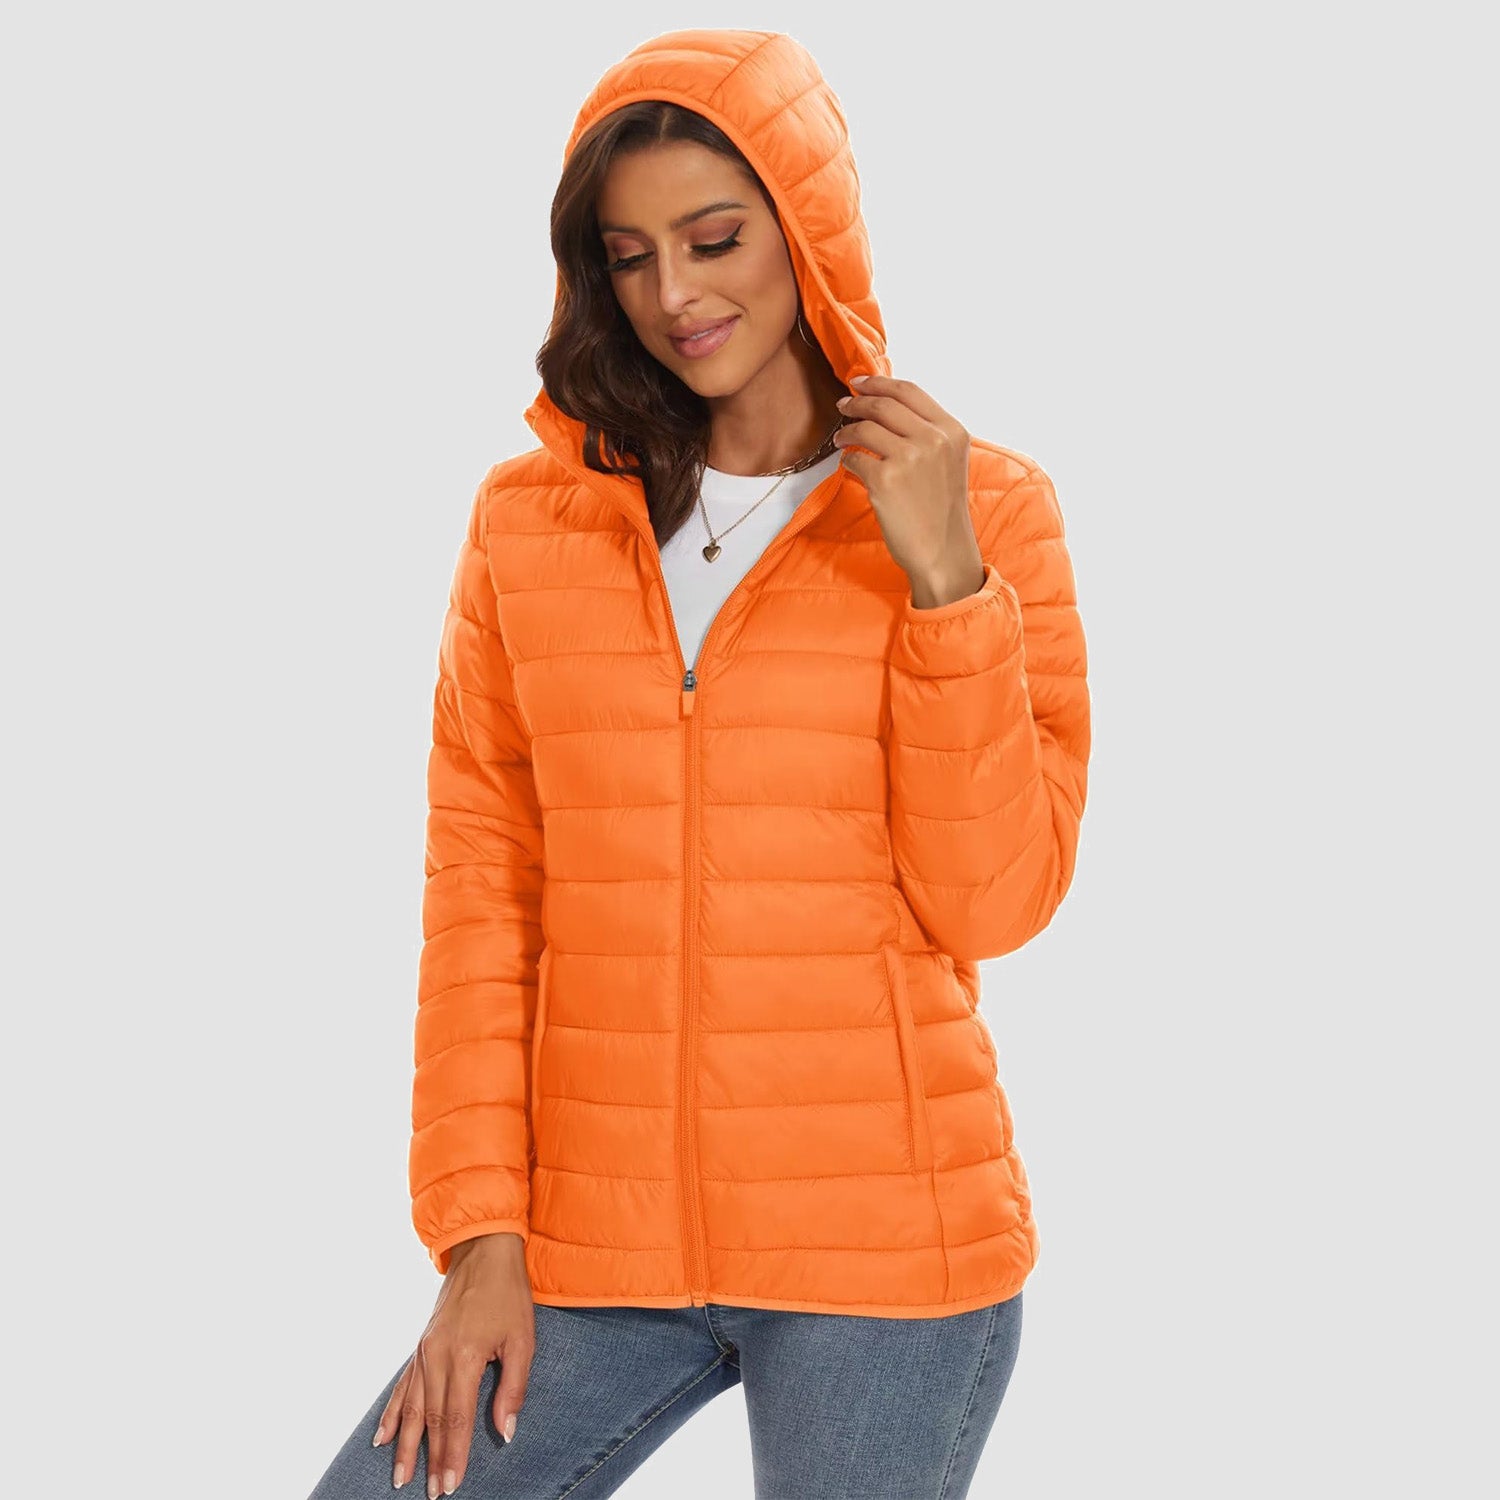 Women's Lightweight Puffer Jacket Hooded Full Zip Quilted Lined Coat for Winter